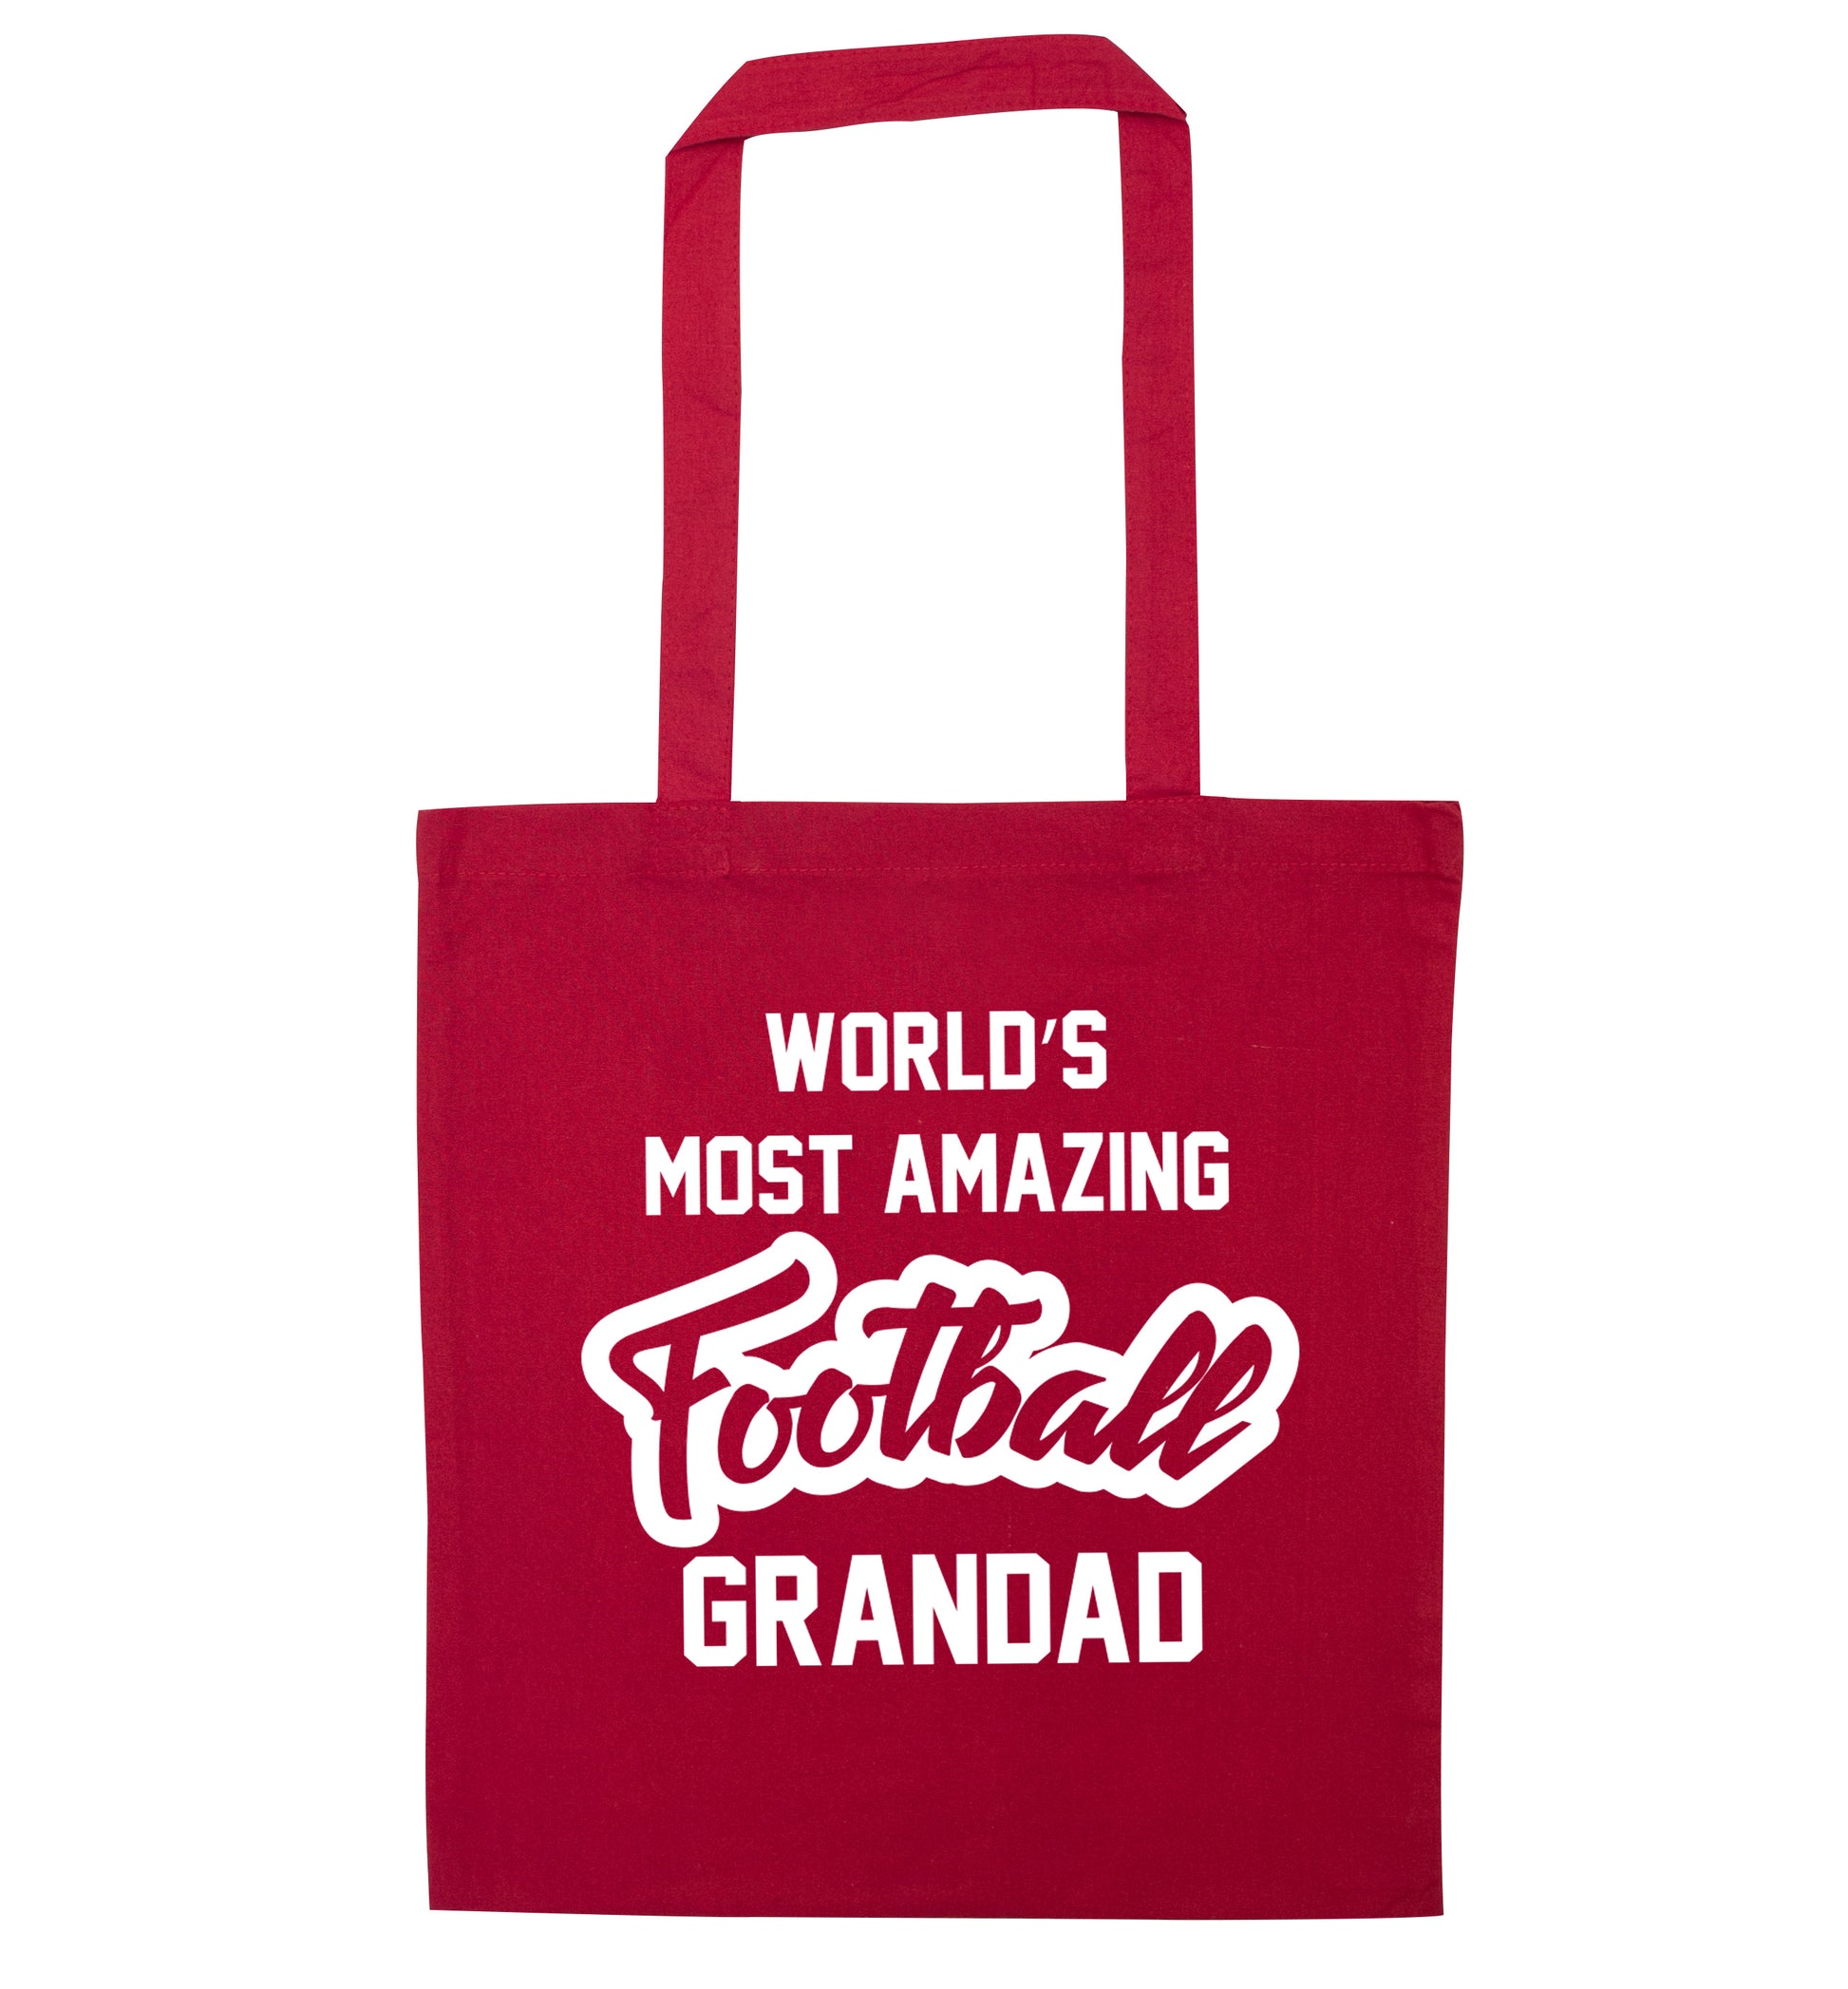 Worlds most amazing football grandad red tote bag